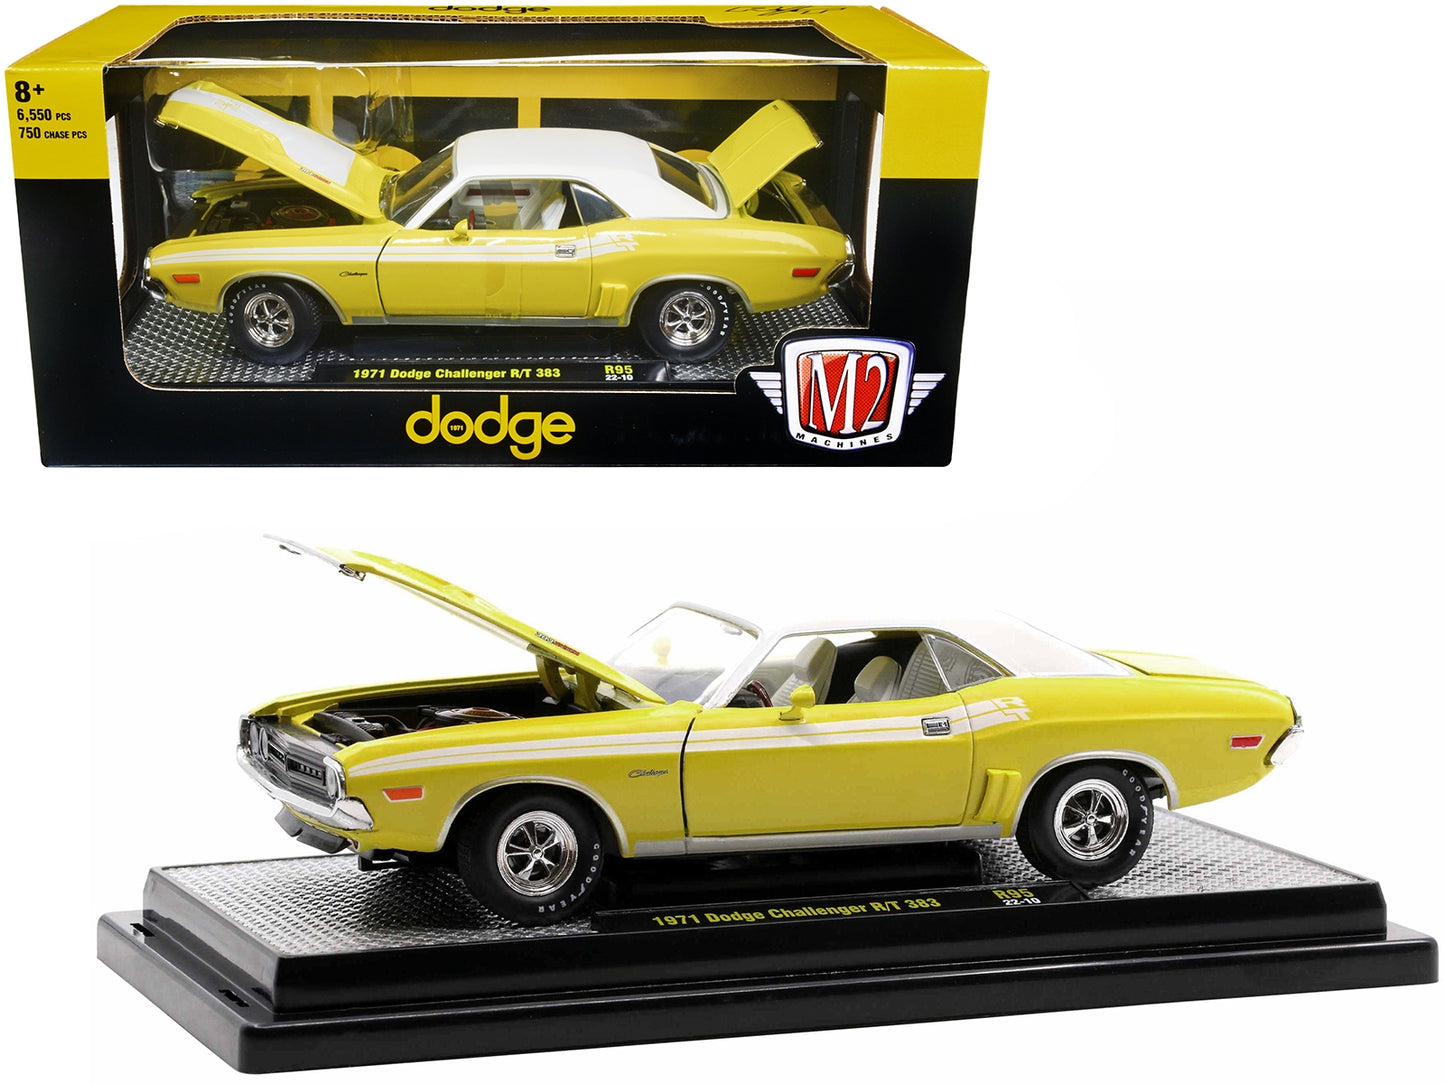 1971 Dodge Challenger R/T 383 Banana Yellow with White Stripes and Vinyl White Top Limited Edition to 6550 pieces Worldwide 1/24 Diecast Model Car by M2 Machines